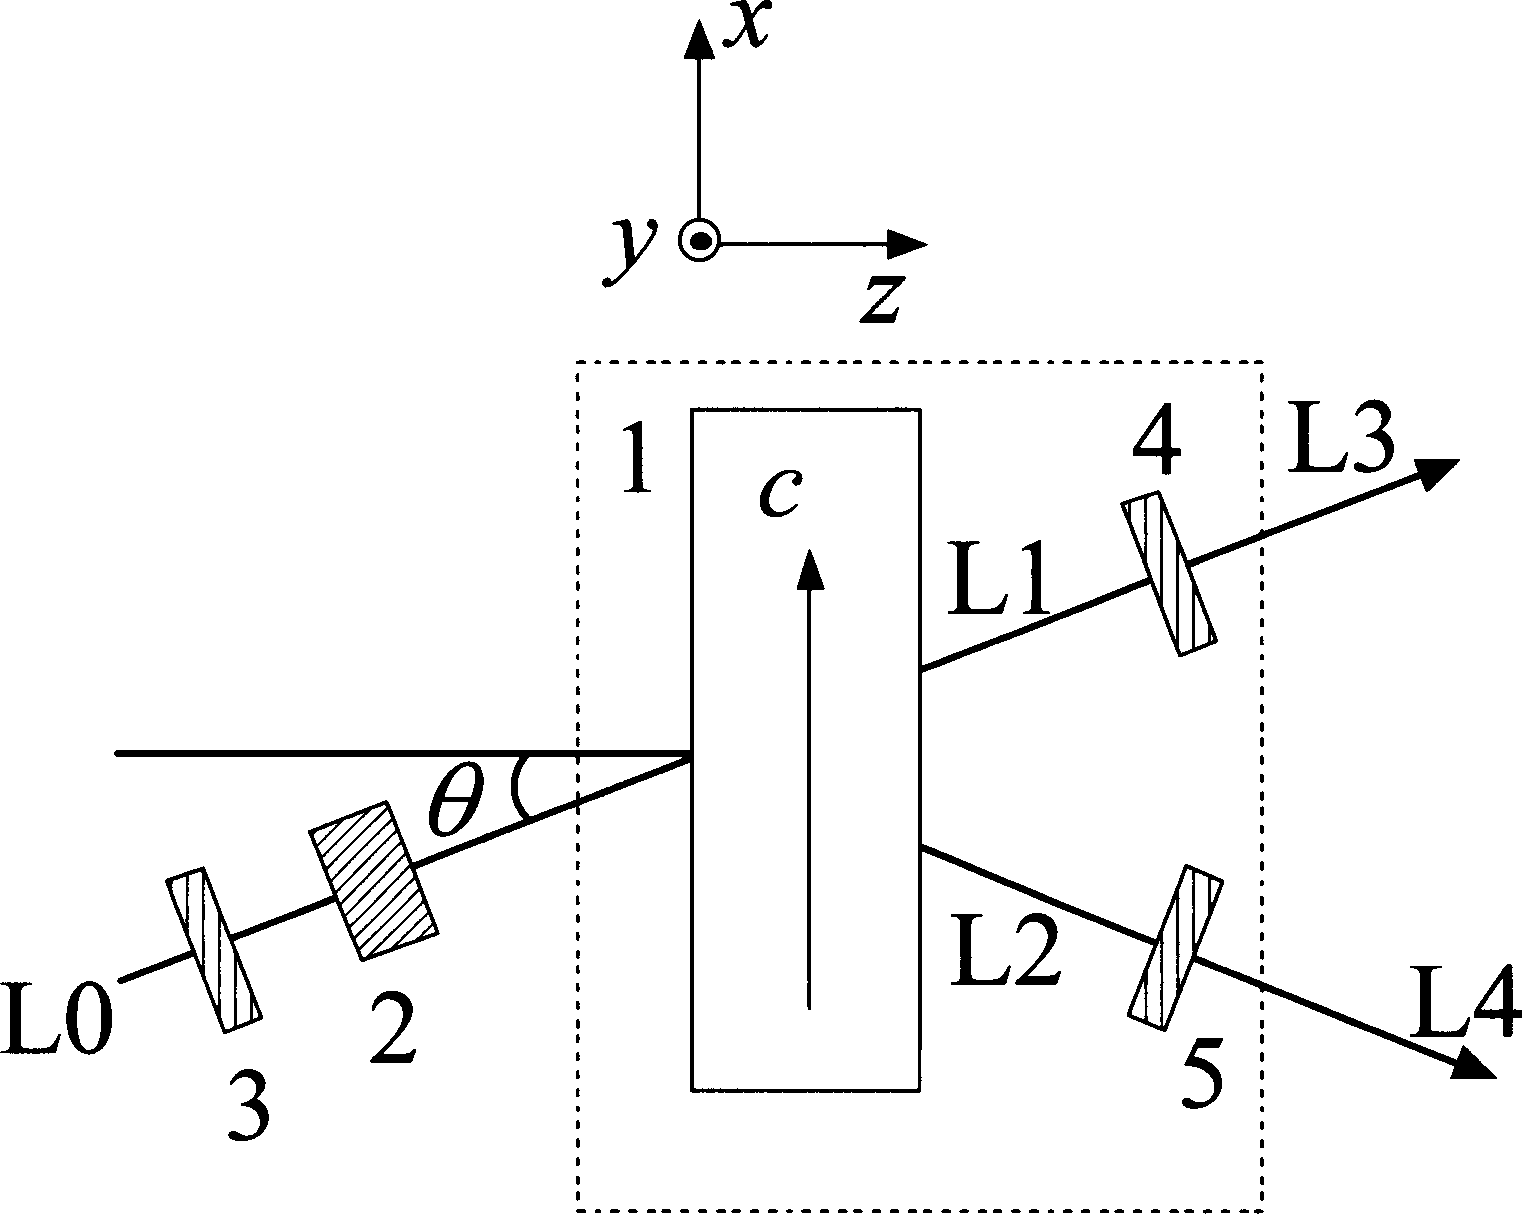 Volume holographic grating forming device for ultra-short pulsed laser beam